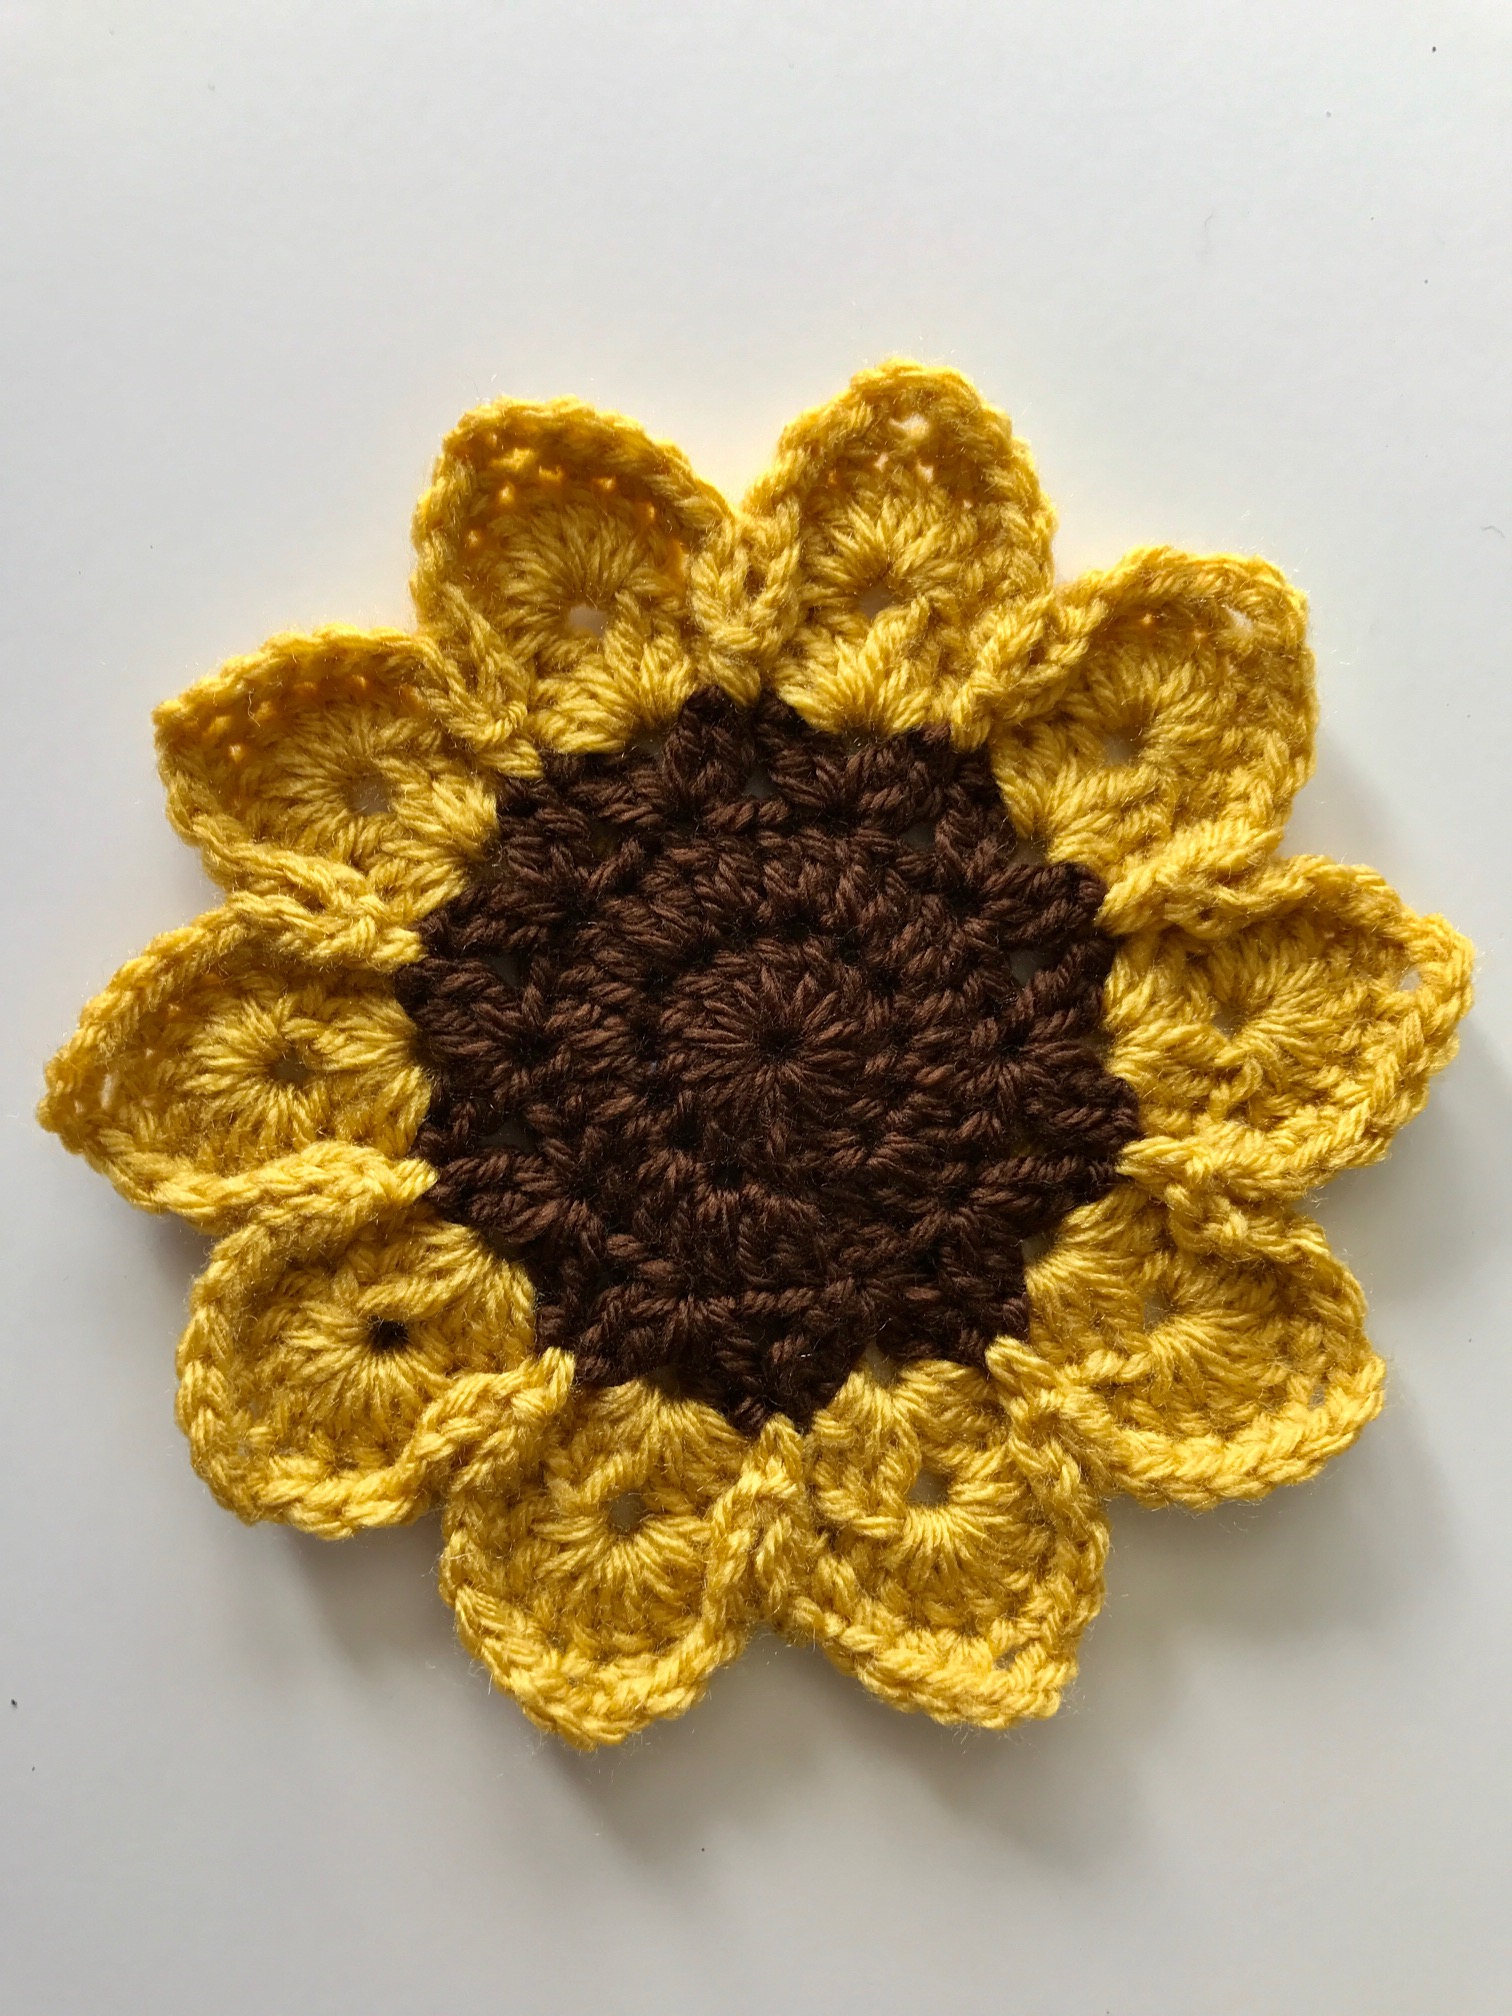 Stunning Jumbo Sunflower Applique -- this crocheted Sunflower looks stunning on a hat! The pattern can also be used to make a fun scrubby! Free pattern